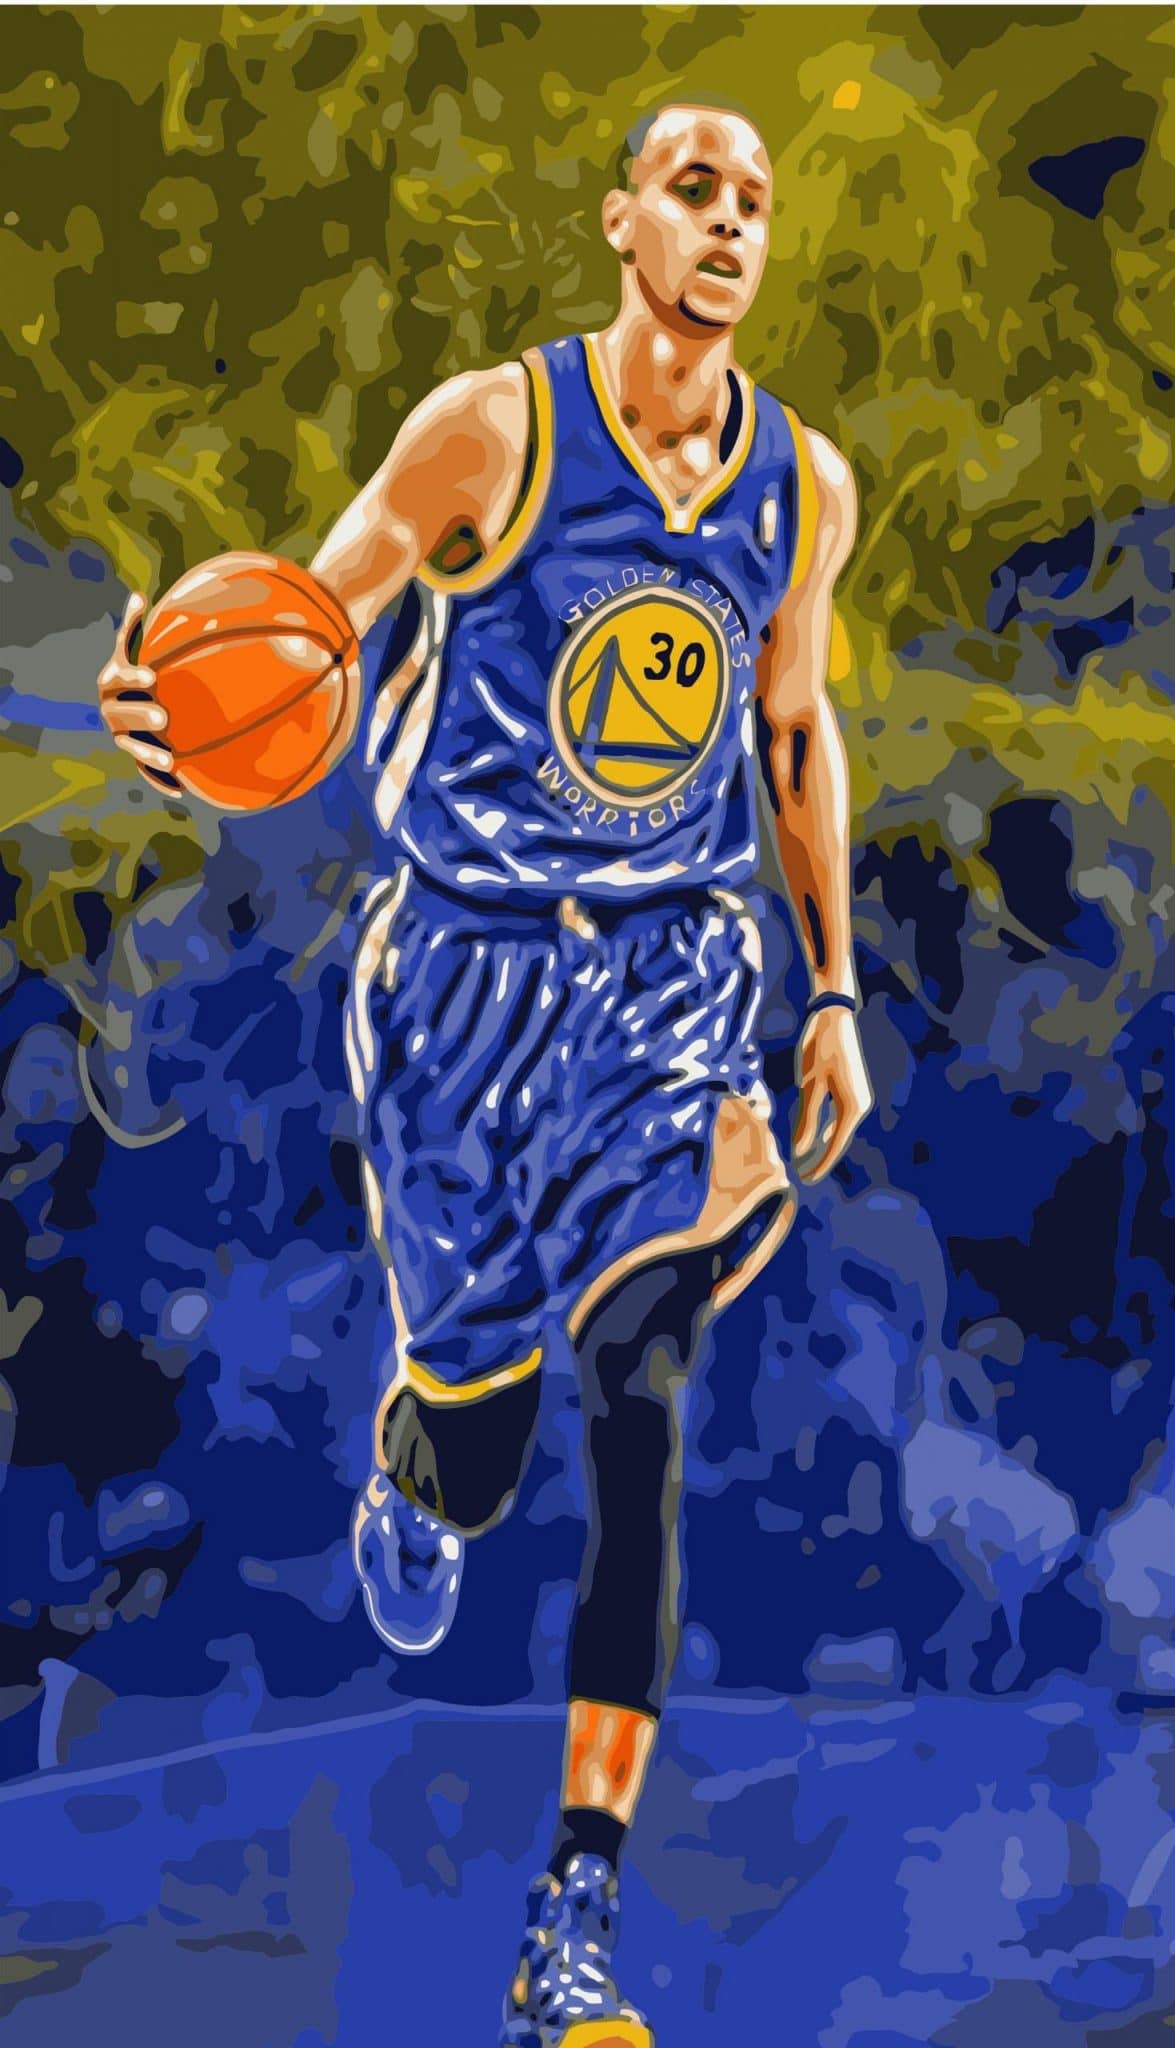 Steph Curry - KISSING.ART - Paintings & Prints, People & Figures